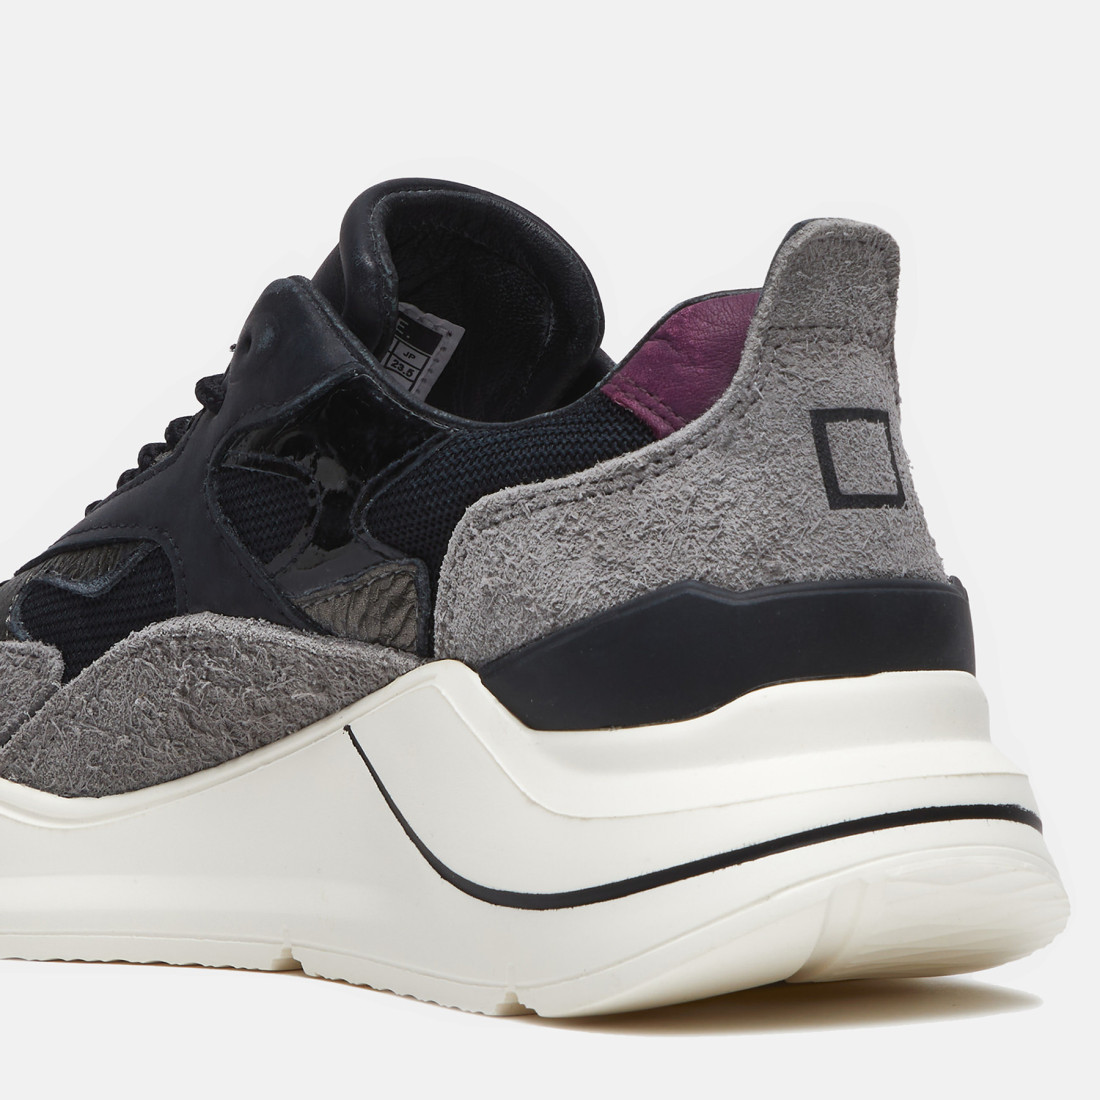 D.A.T.E. Fuga gray and black sneakers in suede and fabric